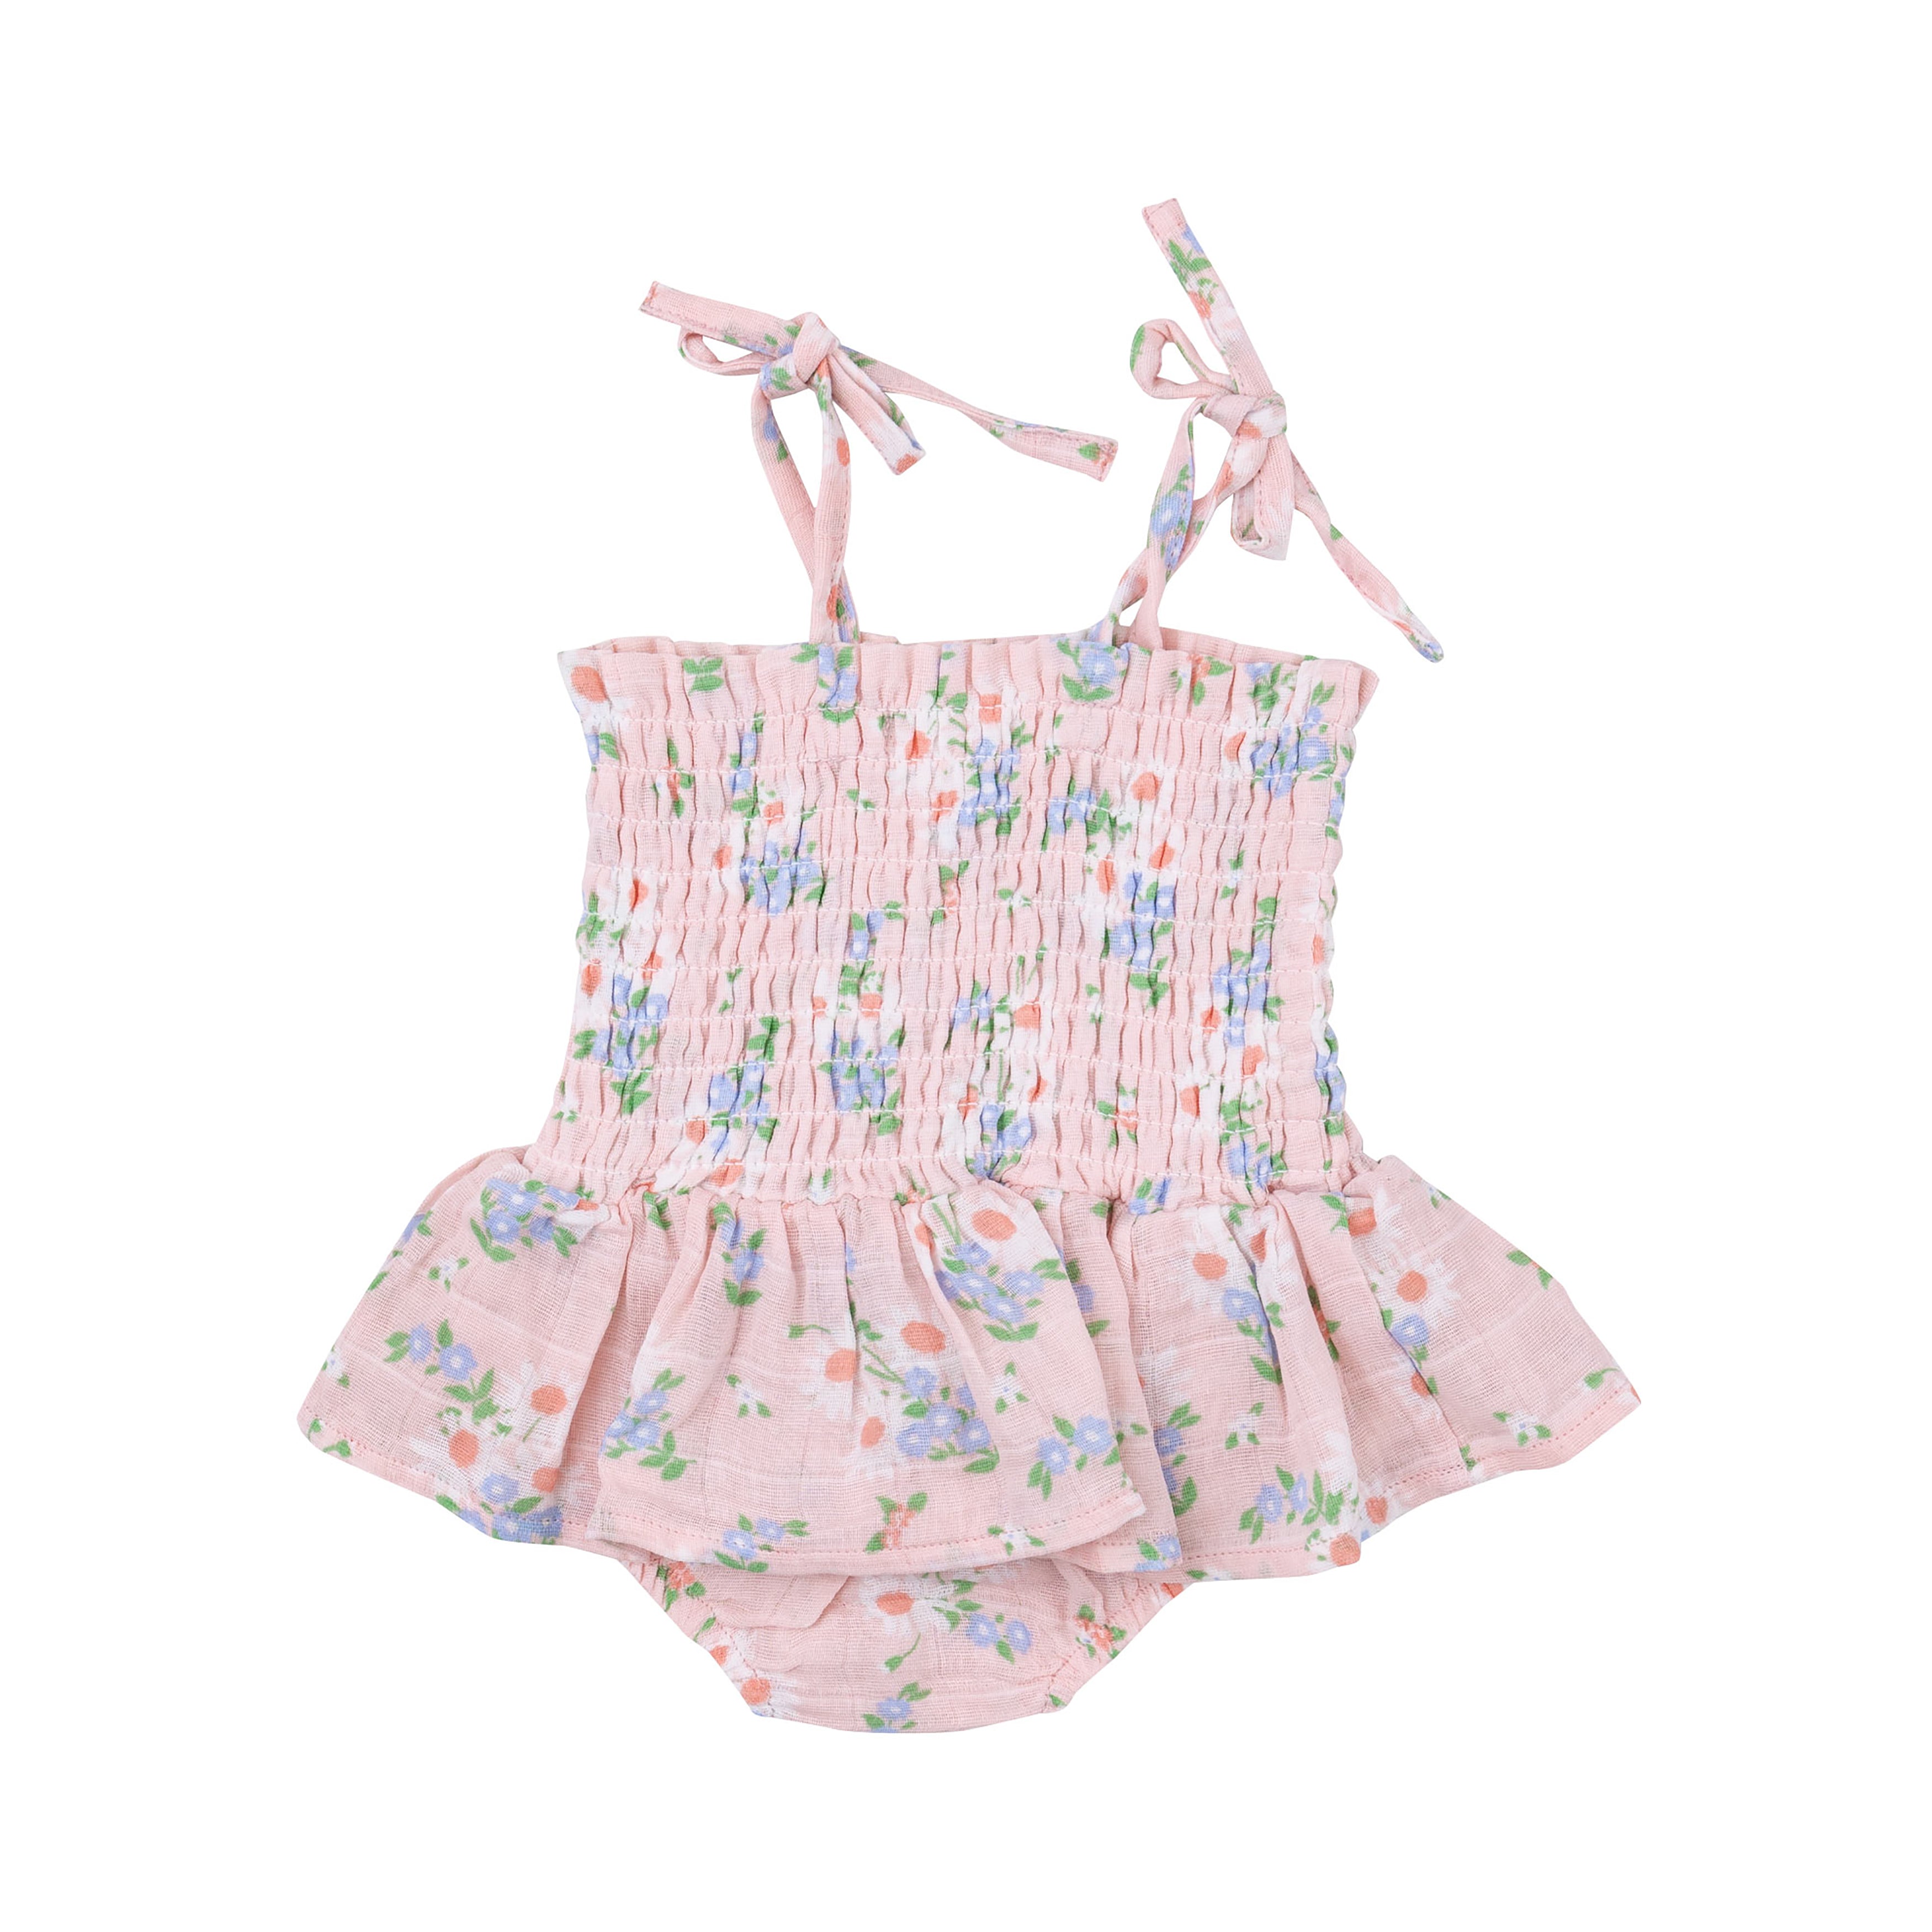 Smocked Bubble W/ Skirt - Gathering Daisies